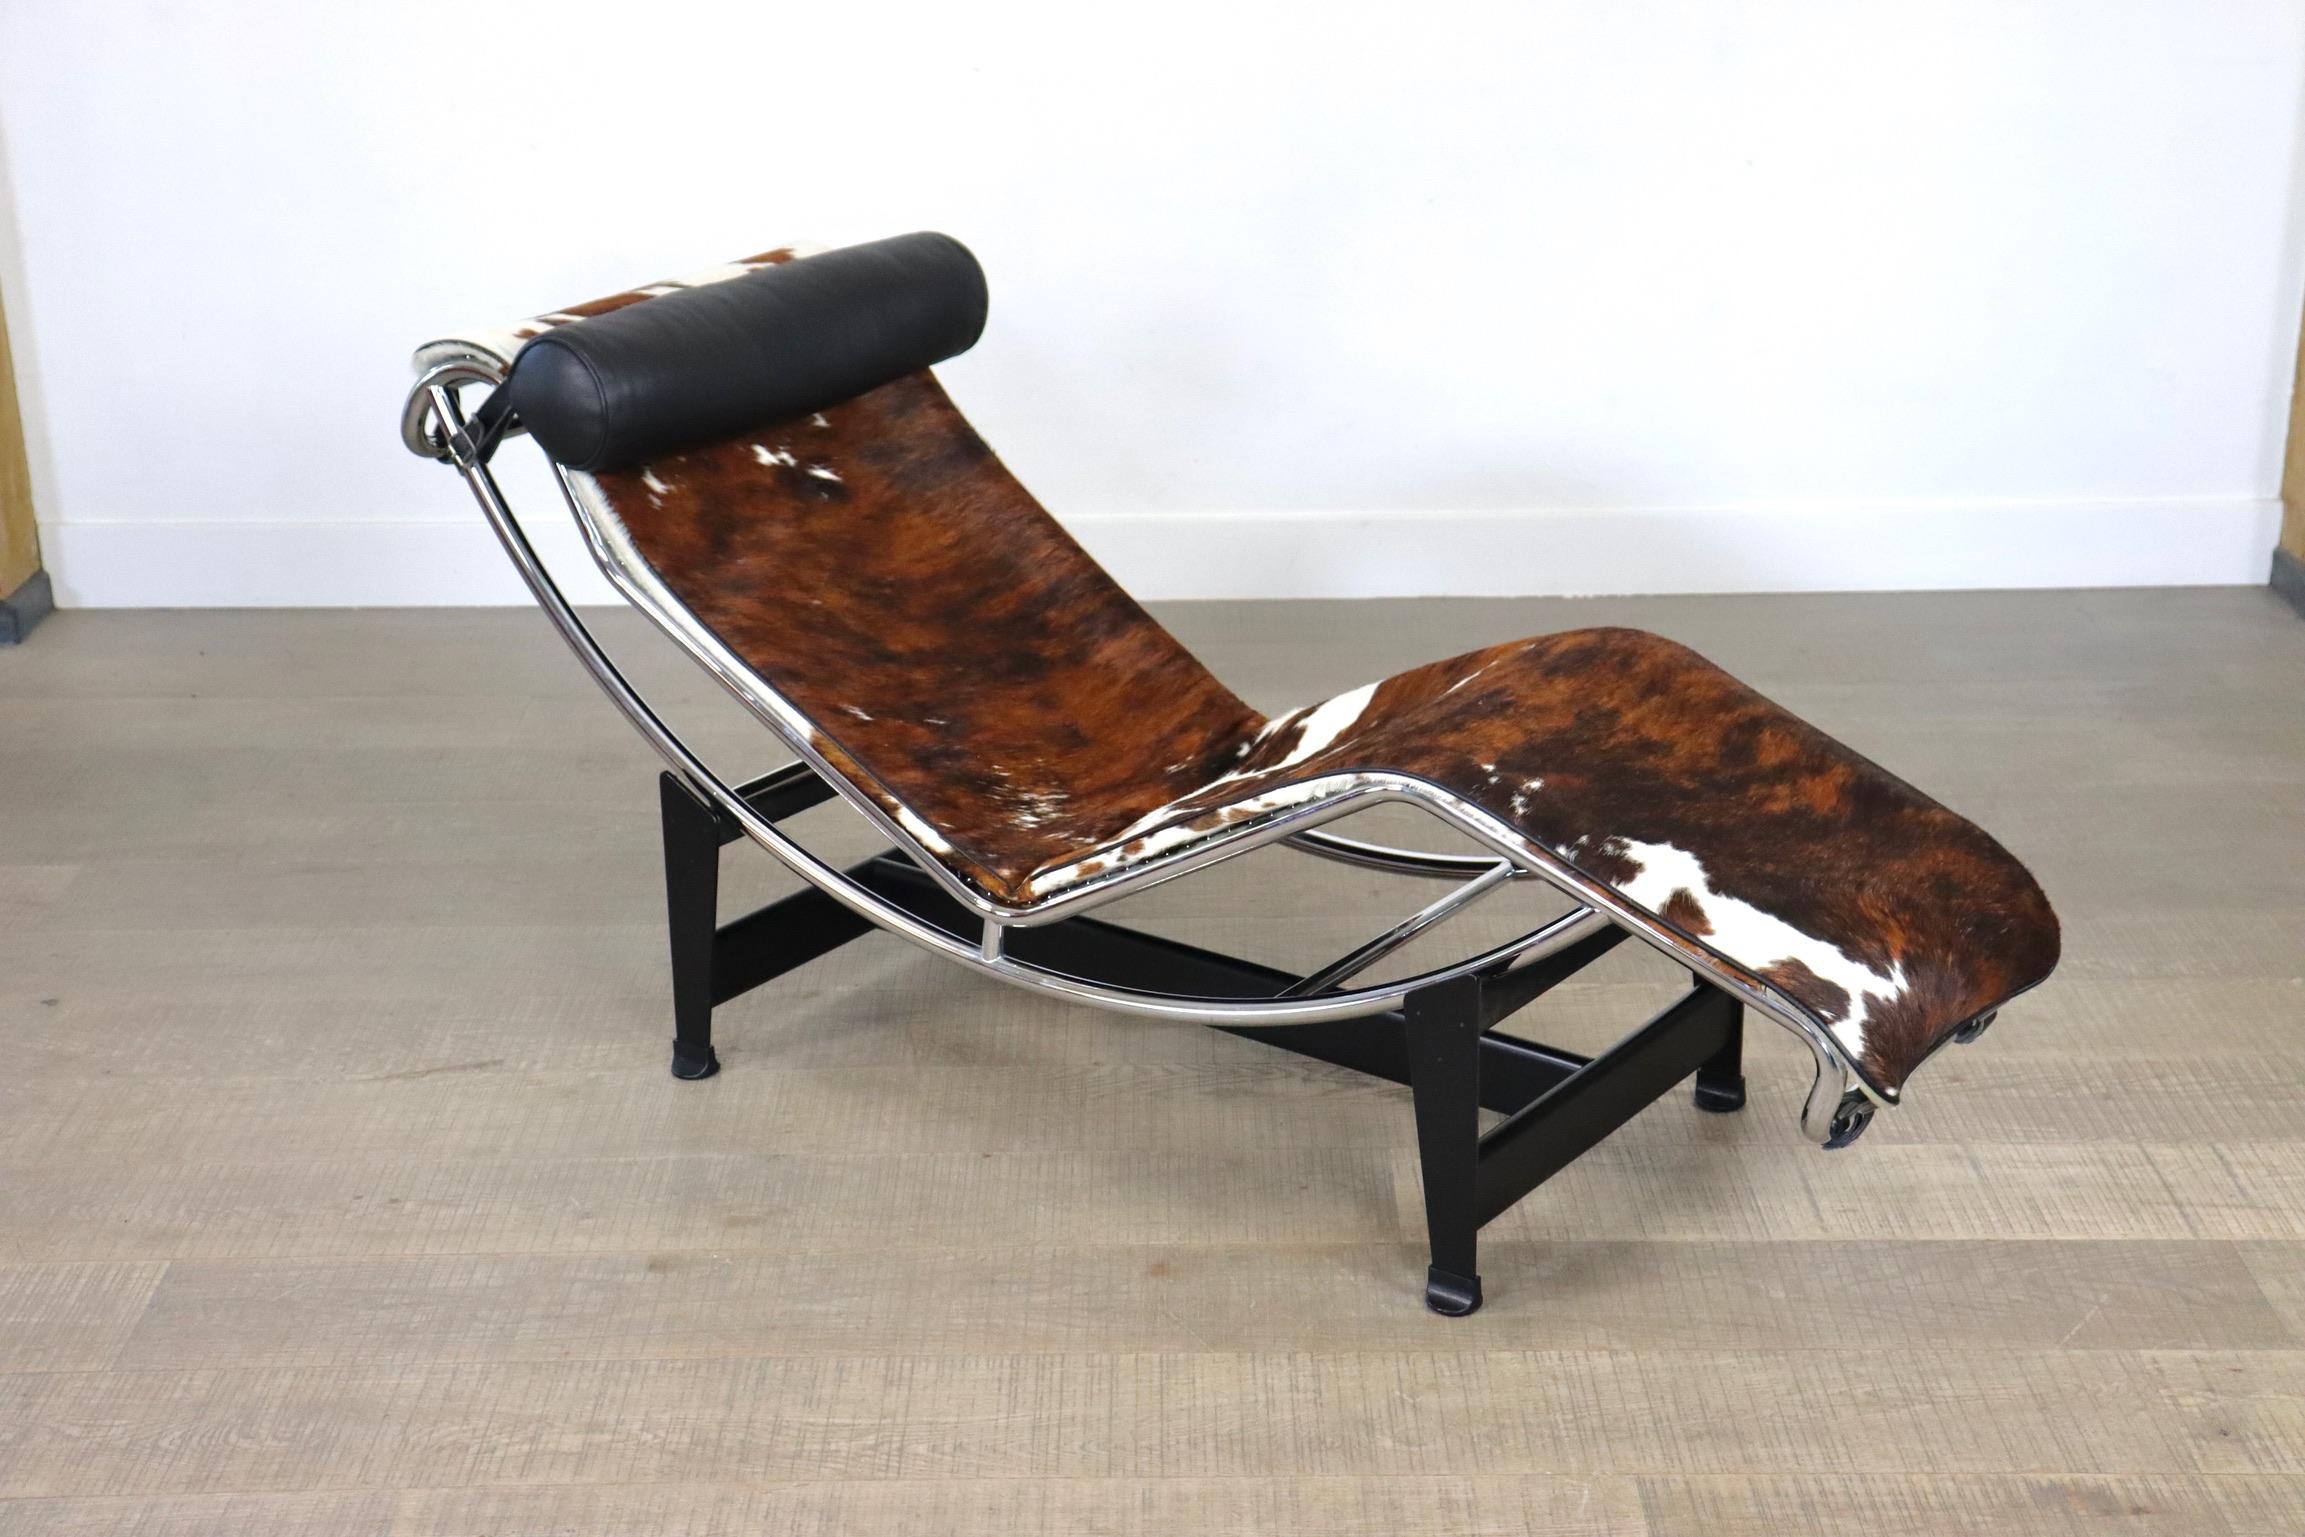 Wonderful chaise longue, model LC4 with ponyskin, designed by Le Corbusier, Pierre Jeanneret and Charlotte Perriand for Cassina in 1965. The chaise Longue was born from the inspiration of the three design artists who wanted to design a comfortable